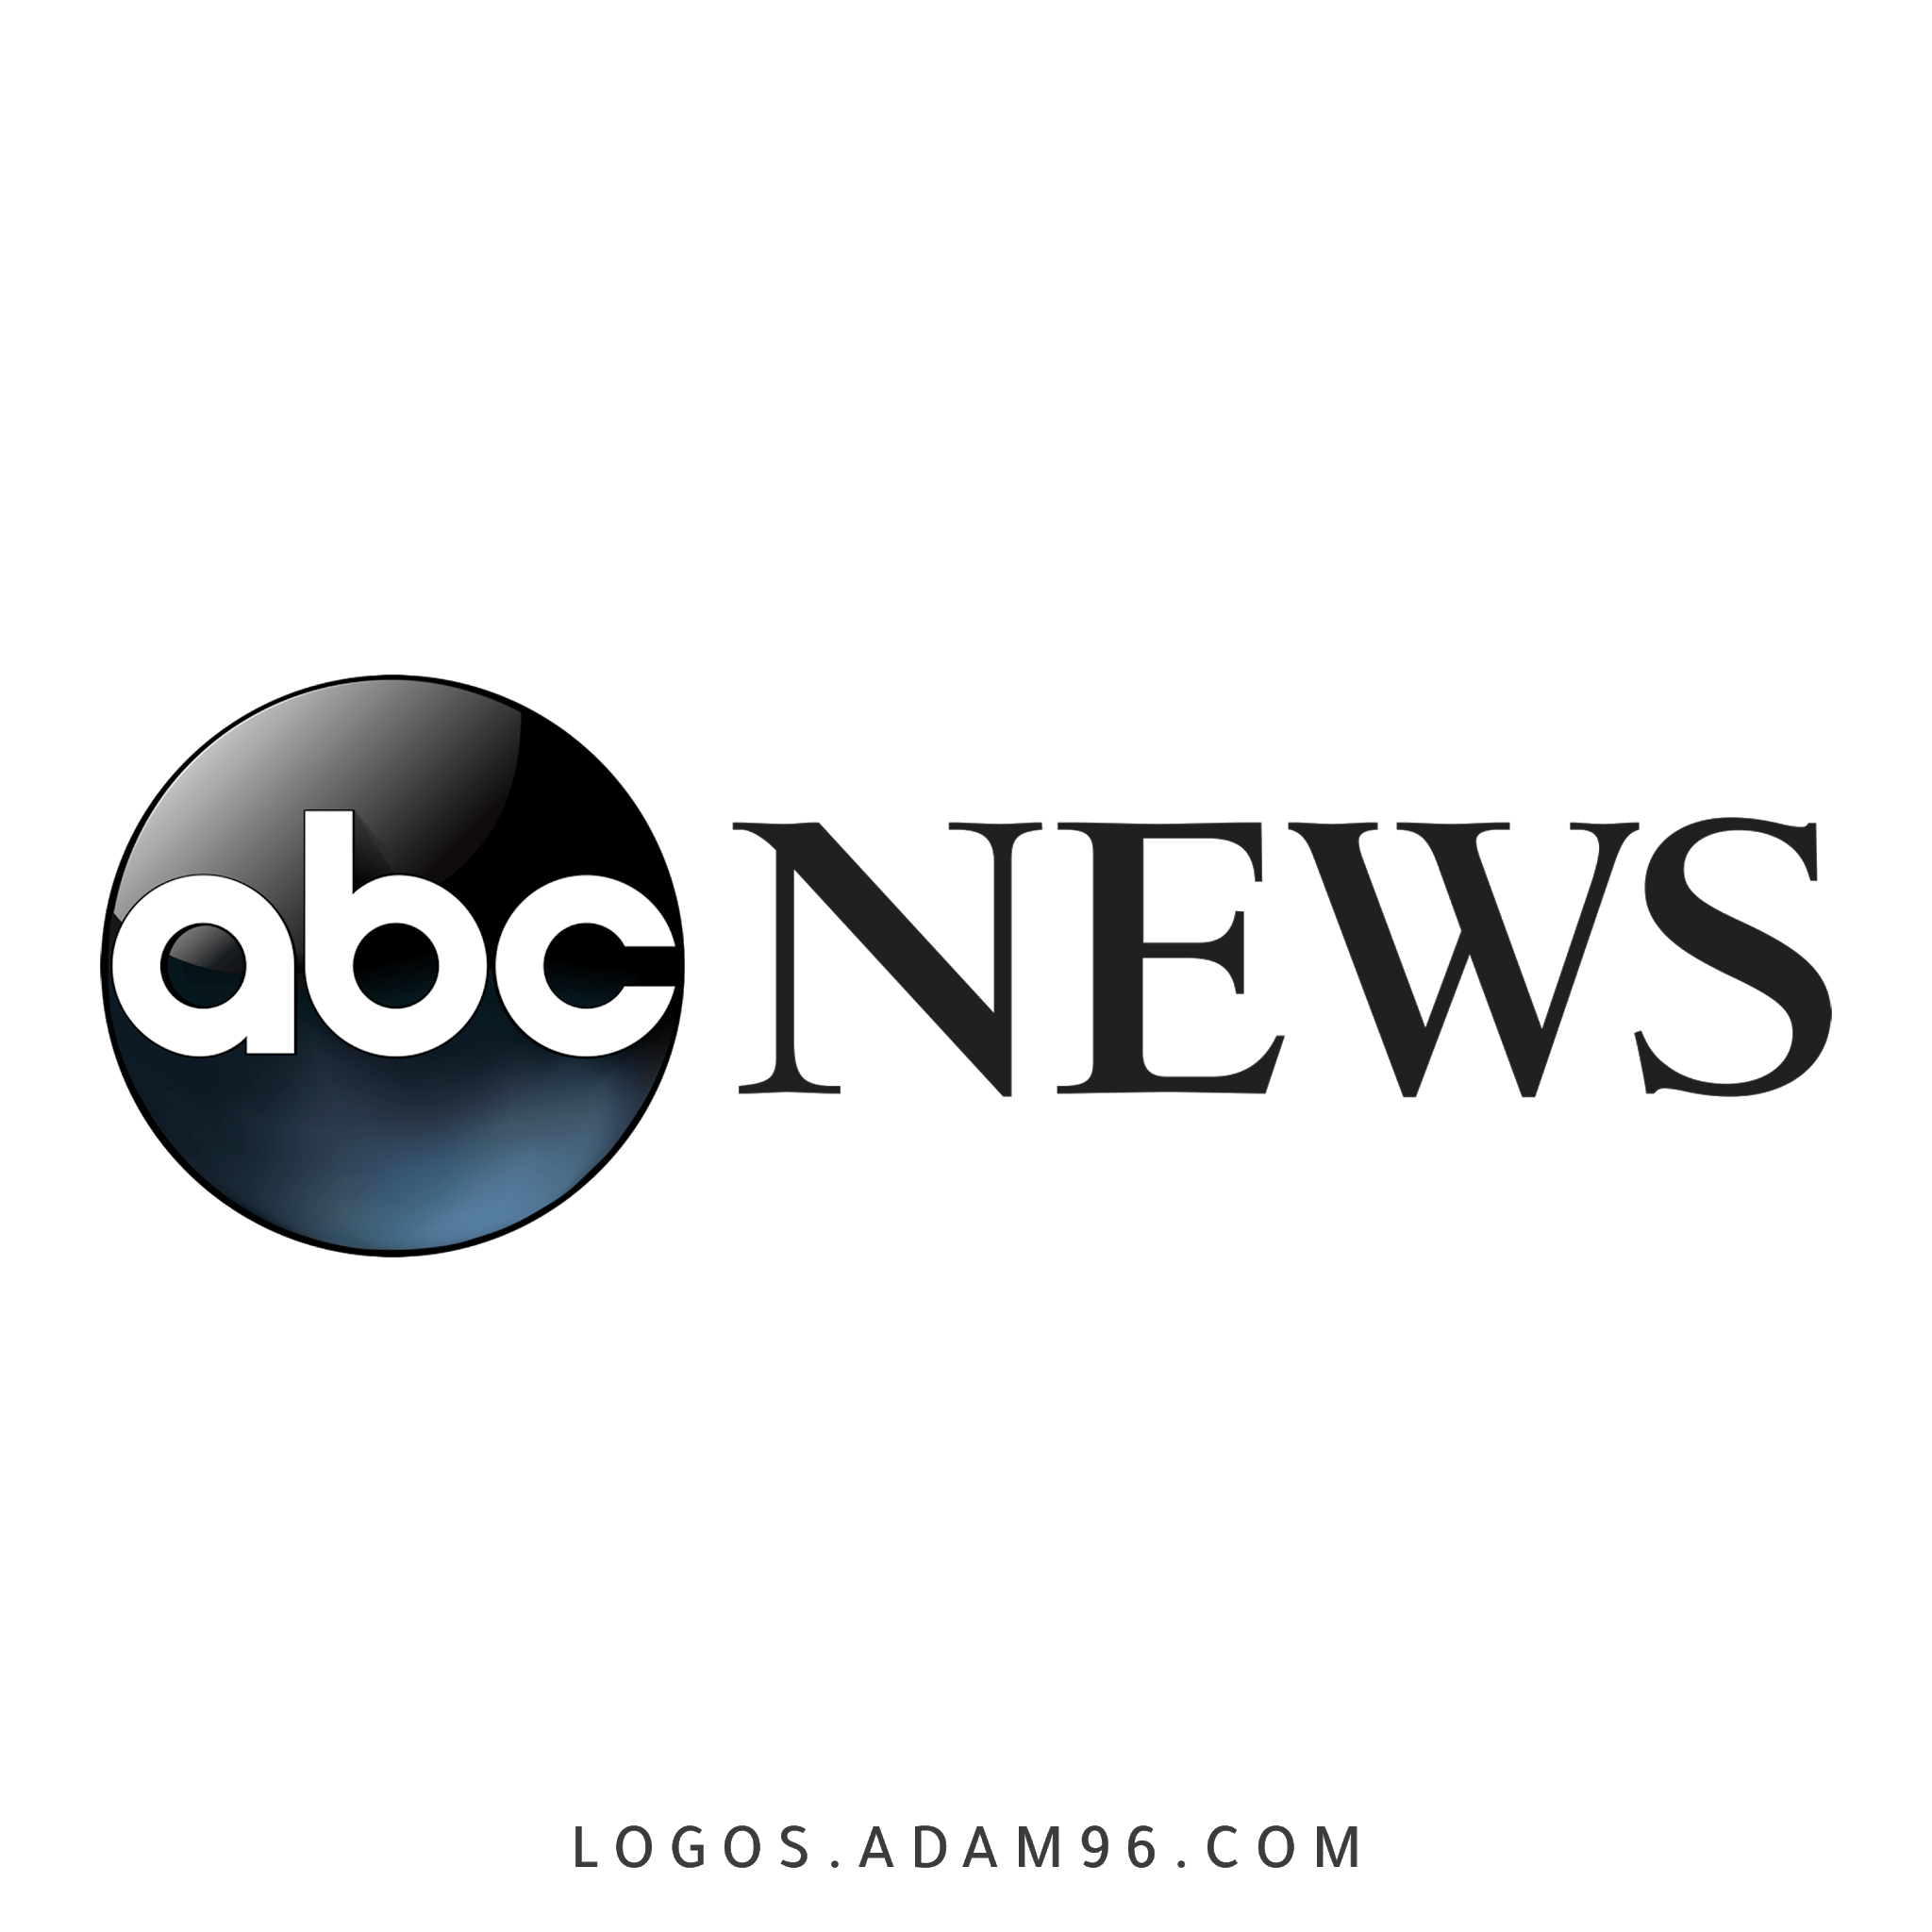 Download Logo Abc News Png Free Vector